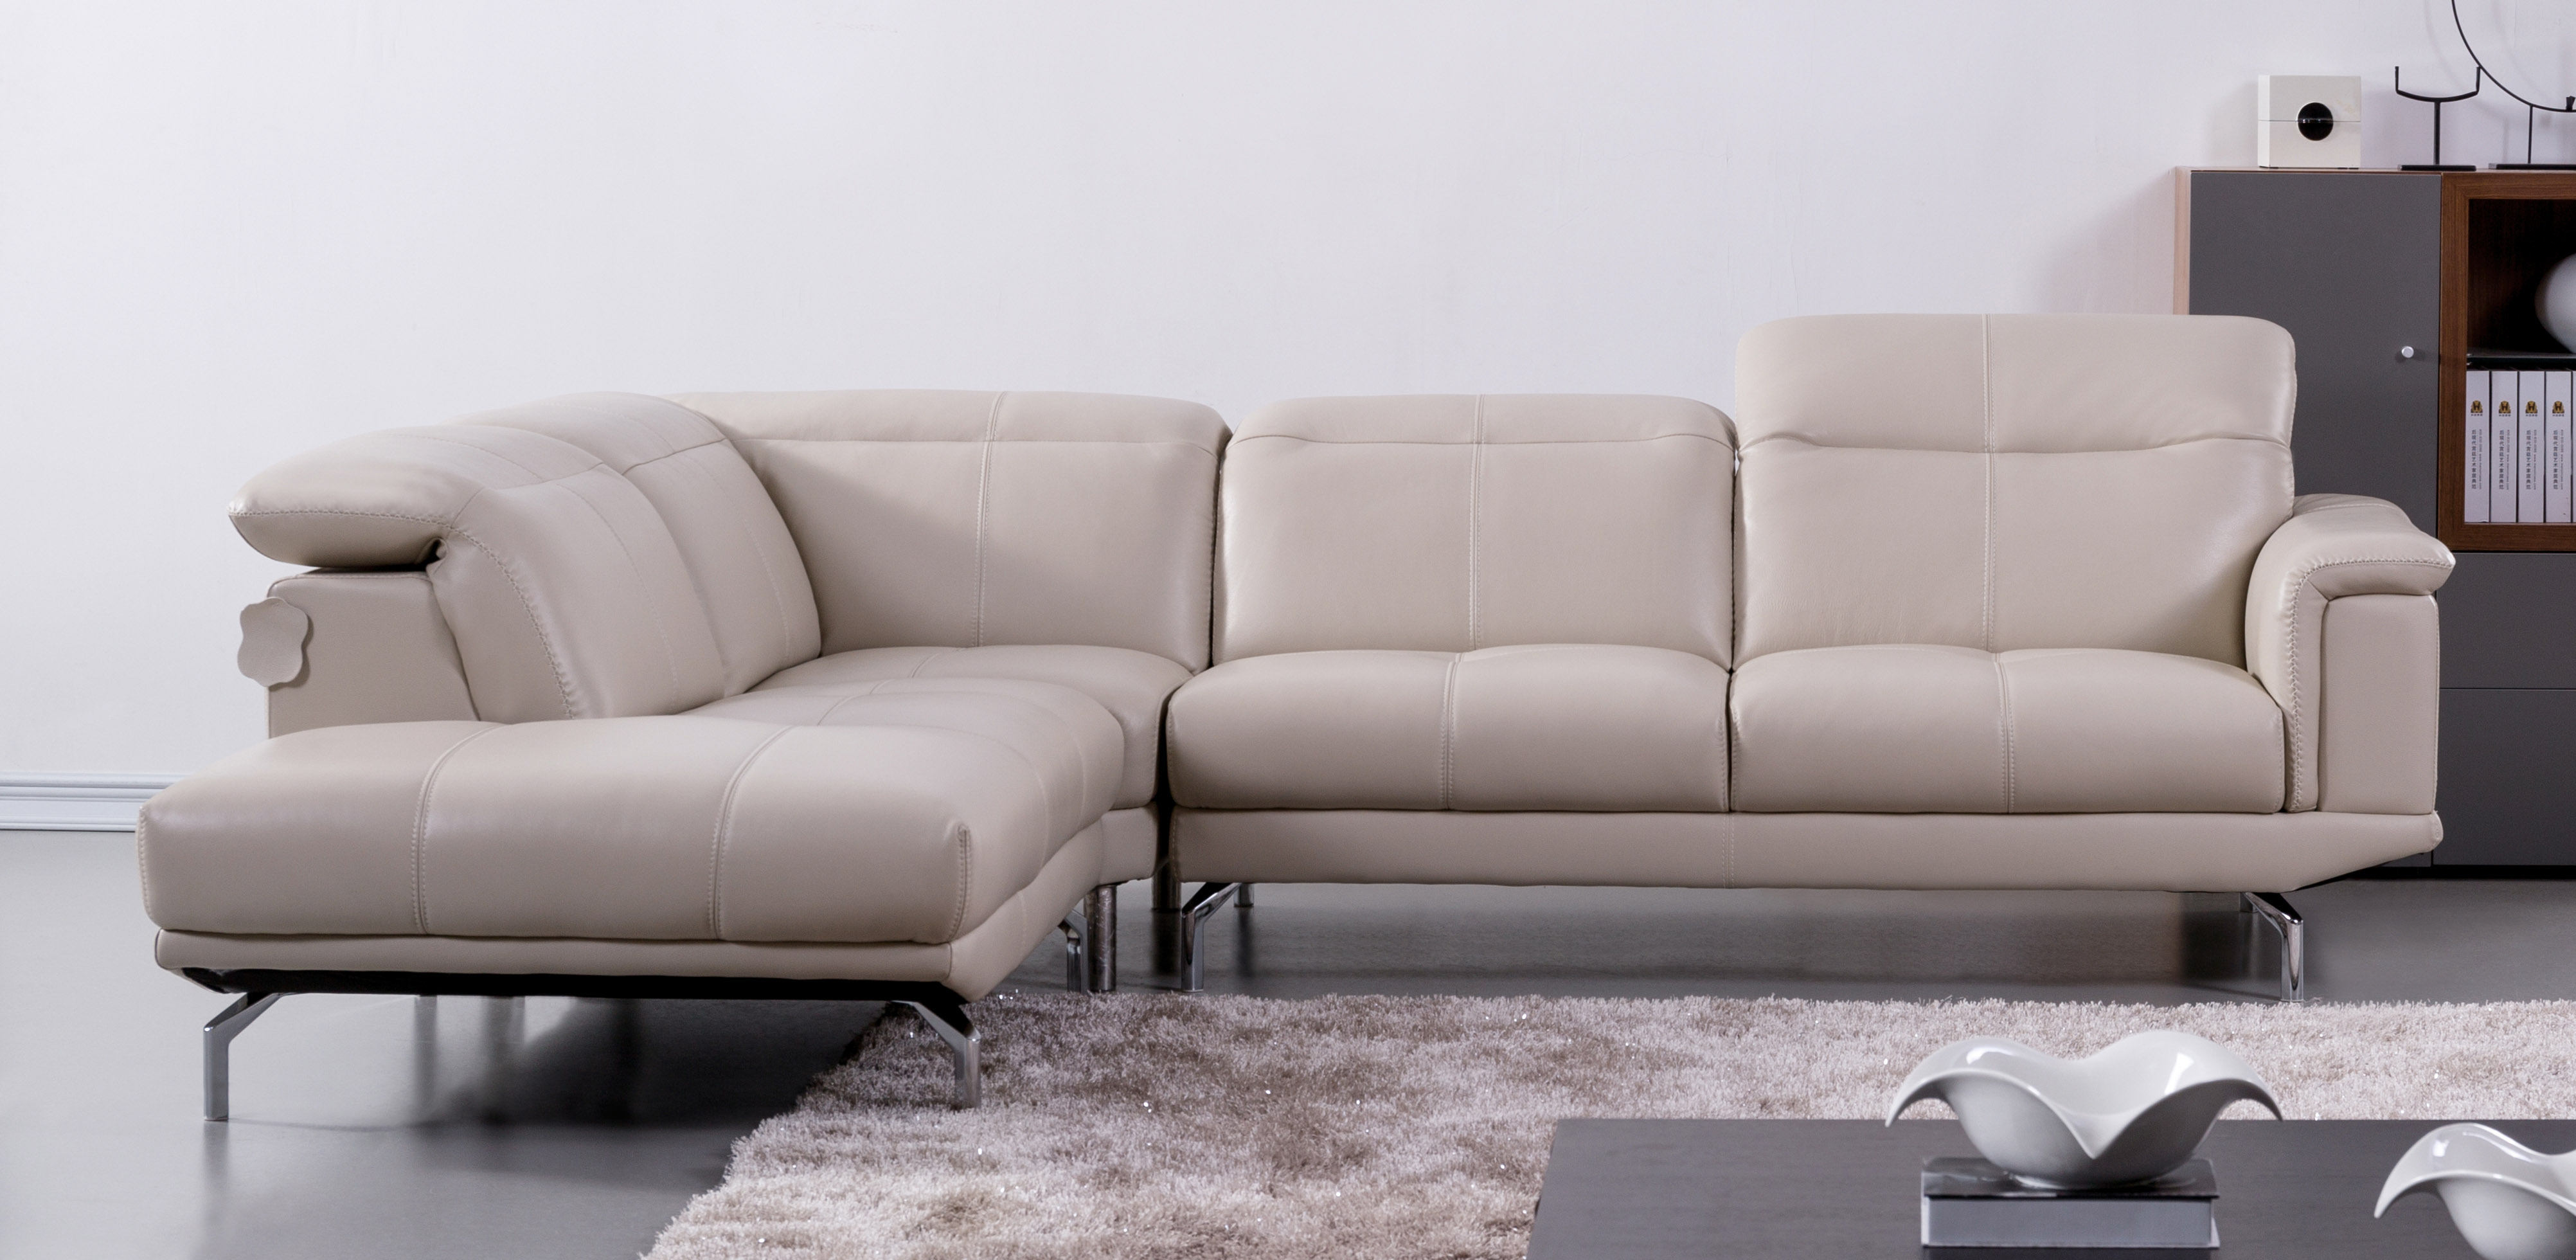 leather sectional sofa doral